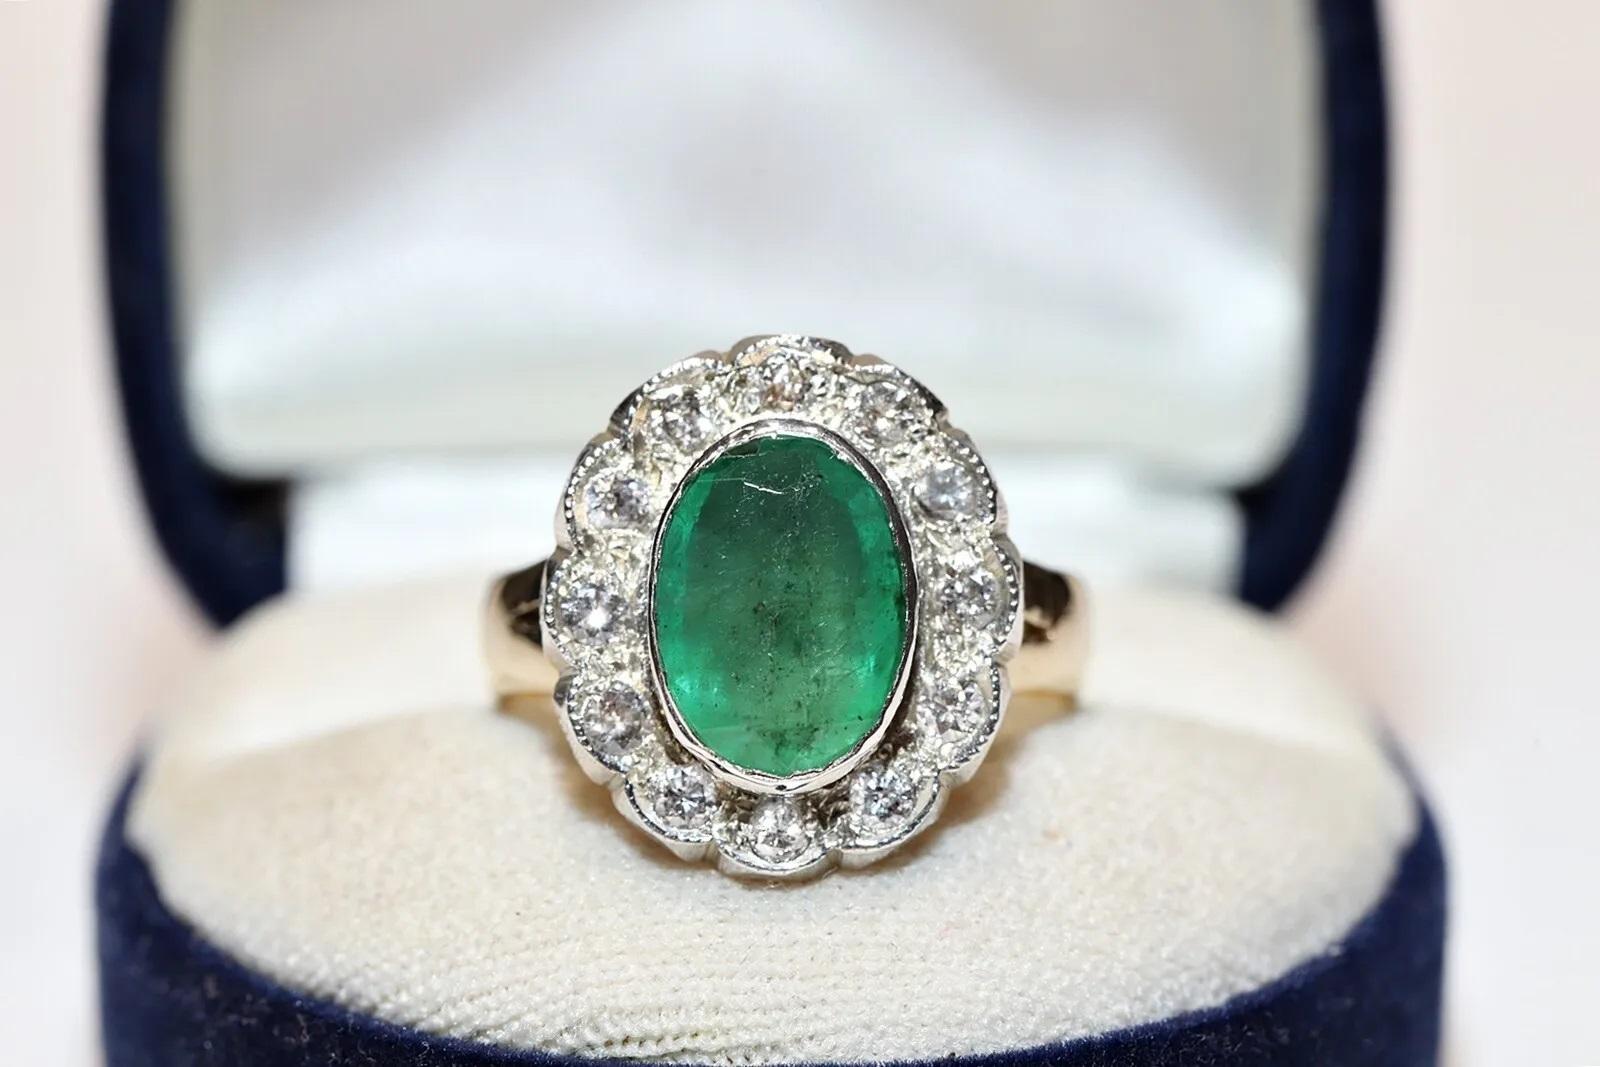 In very good condition.
Total weight is 7.4 grams.
Totally is diamond  0.45 carat.
The diamond is has  H color and vs-s1-s2.
Totally is emerald 2 carat.
Ring size is US 8.2 (We offer free resizing)
We can make any size.
Box is not included.
Please